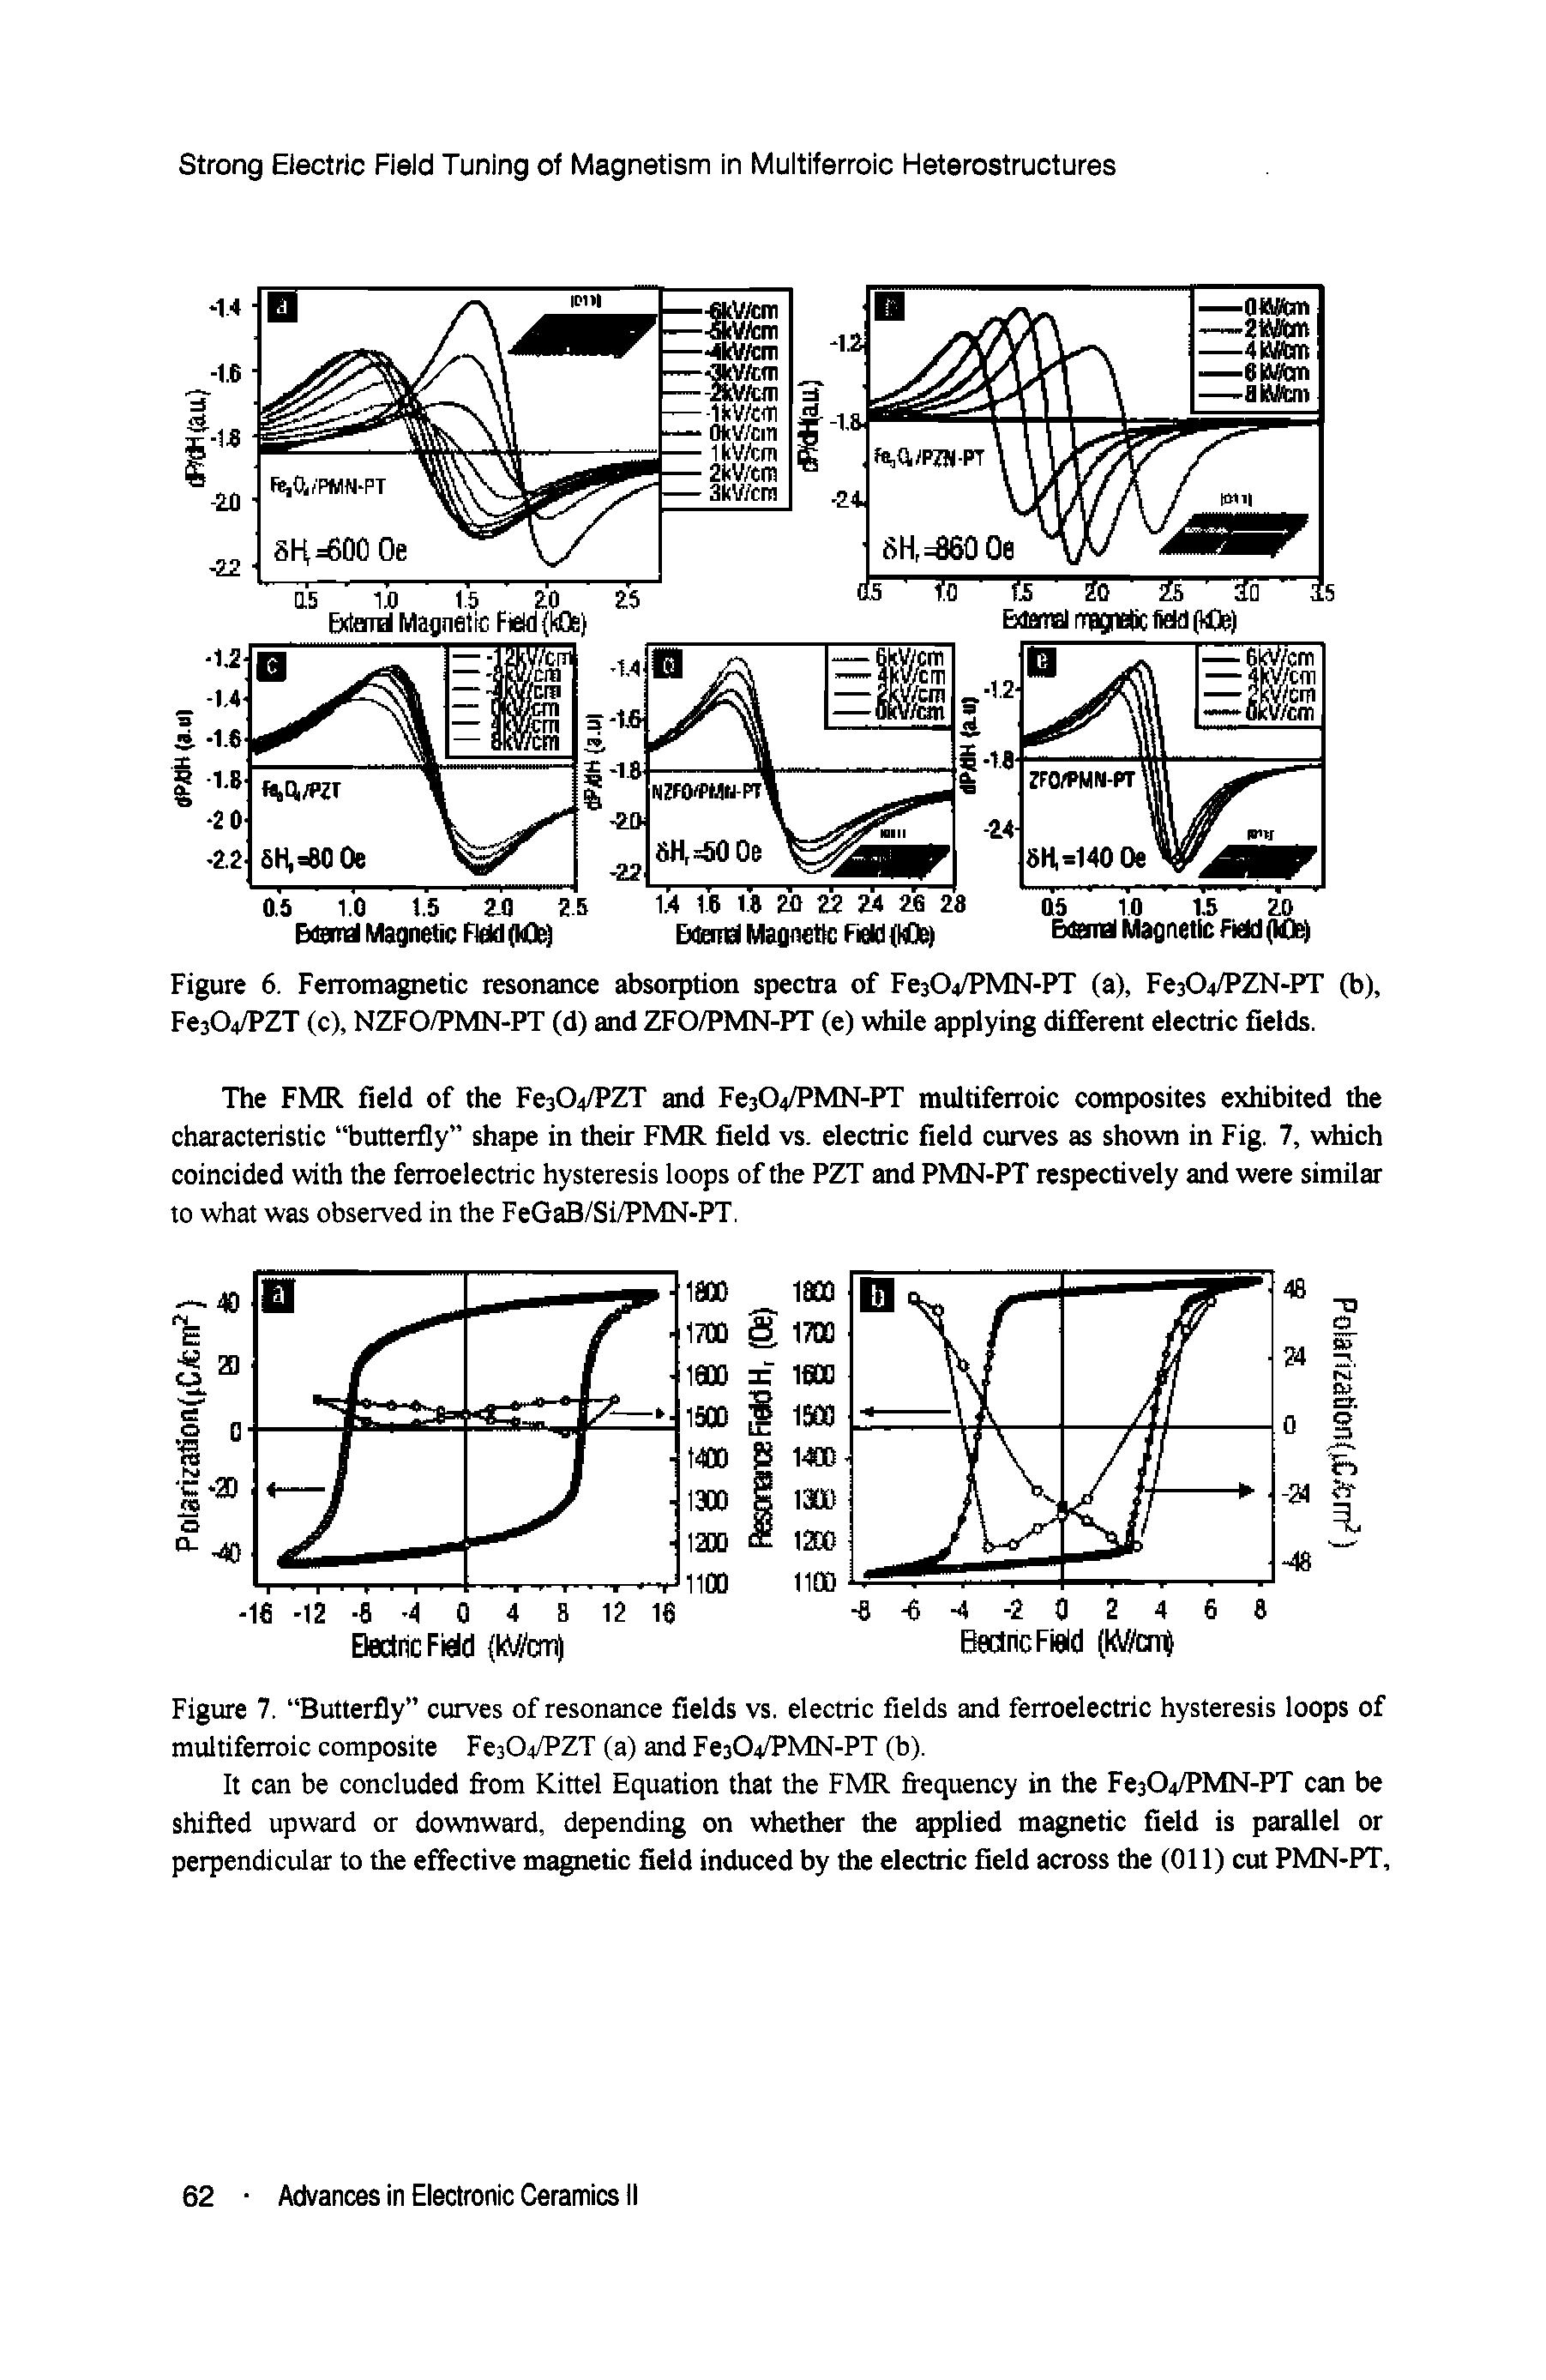 Figure 7. Butterfly curves of resonance fields vs. electric fields and ferroelectric hysteresis loops of muitiferroic composite Fe304/PZT (a) and FesOVPMN-PT (b).